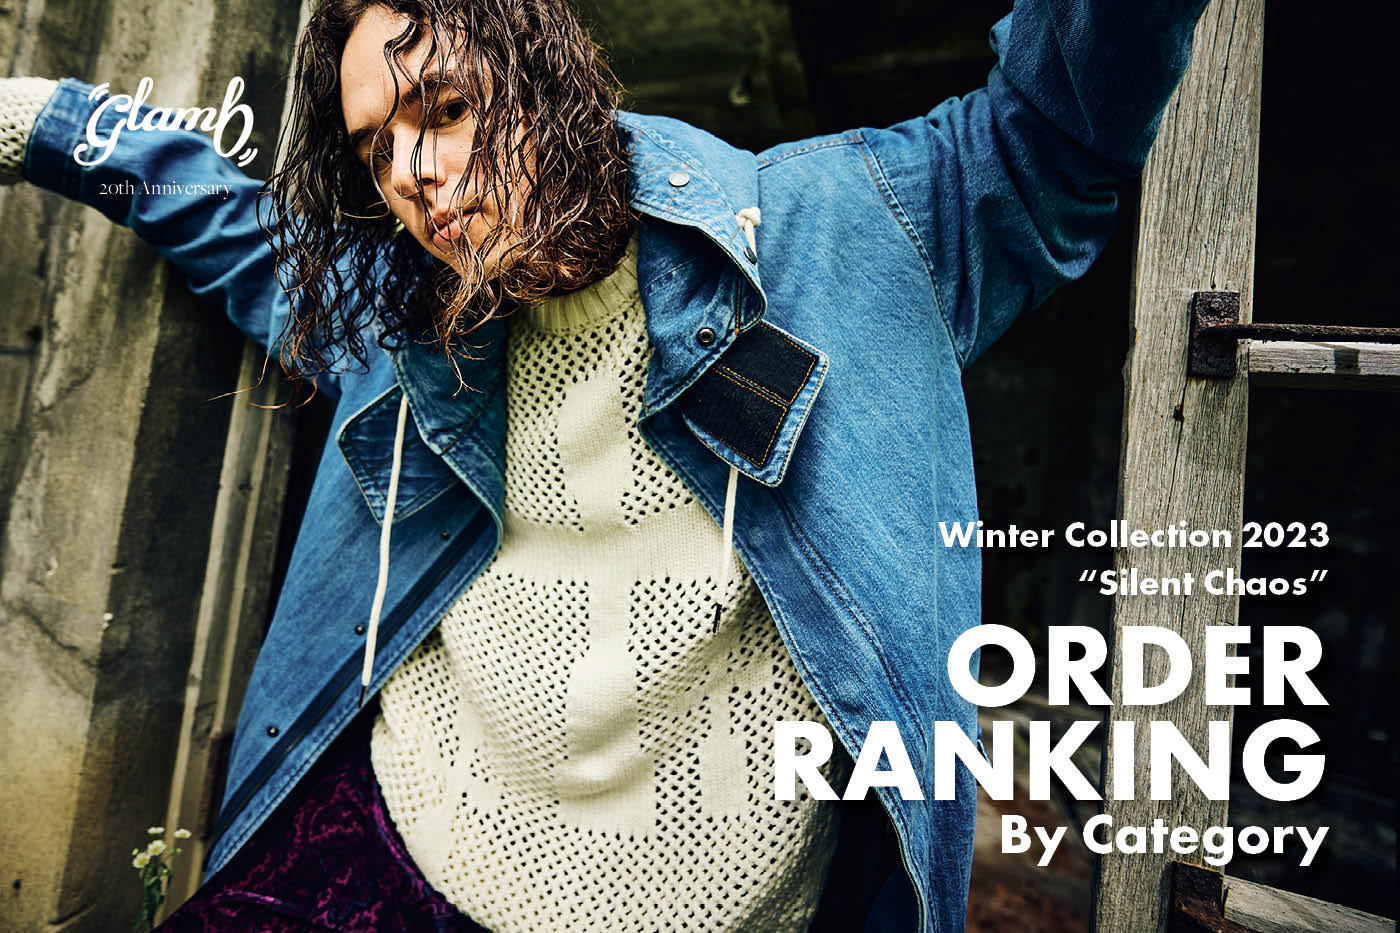 Winter Collection 2023 ORDER RANKING